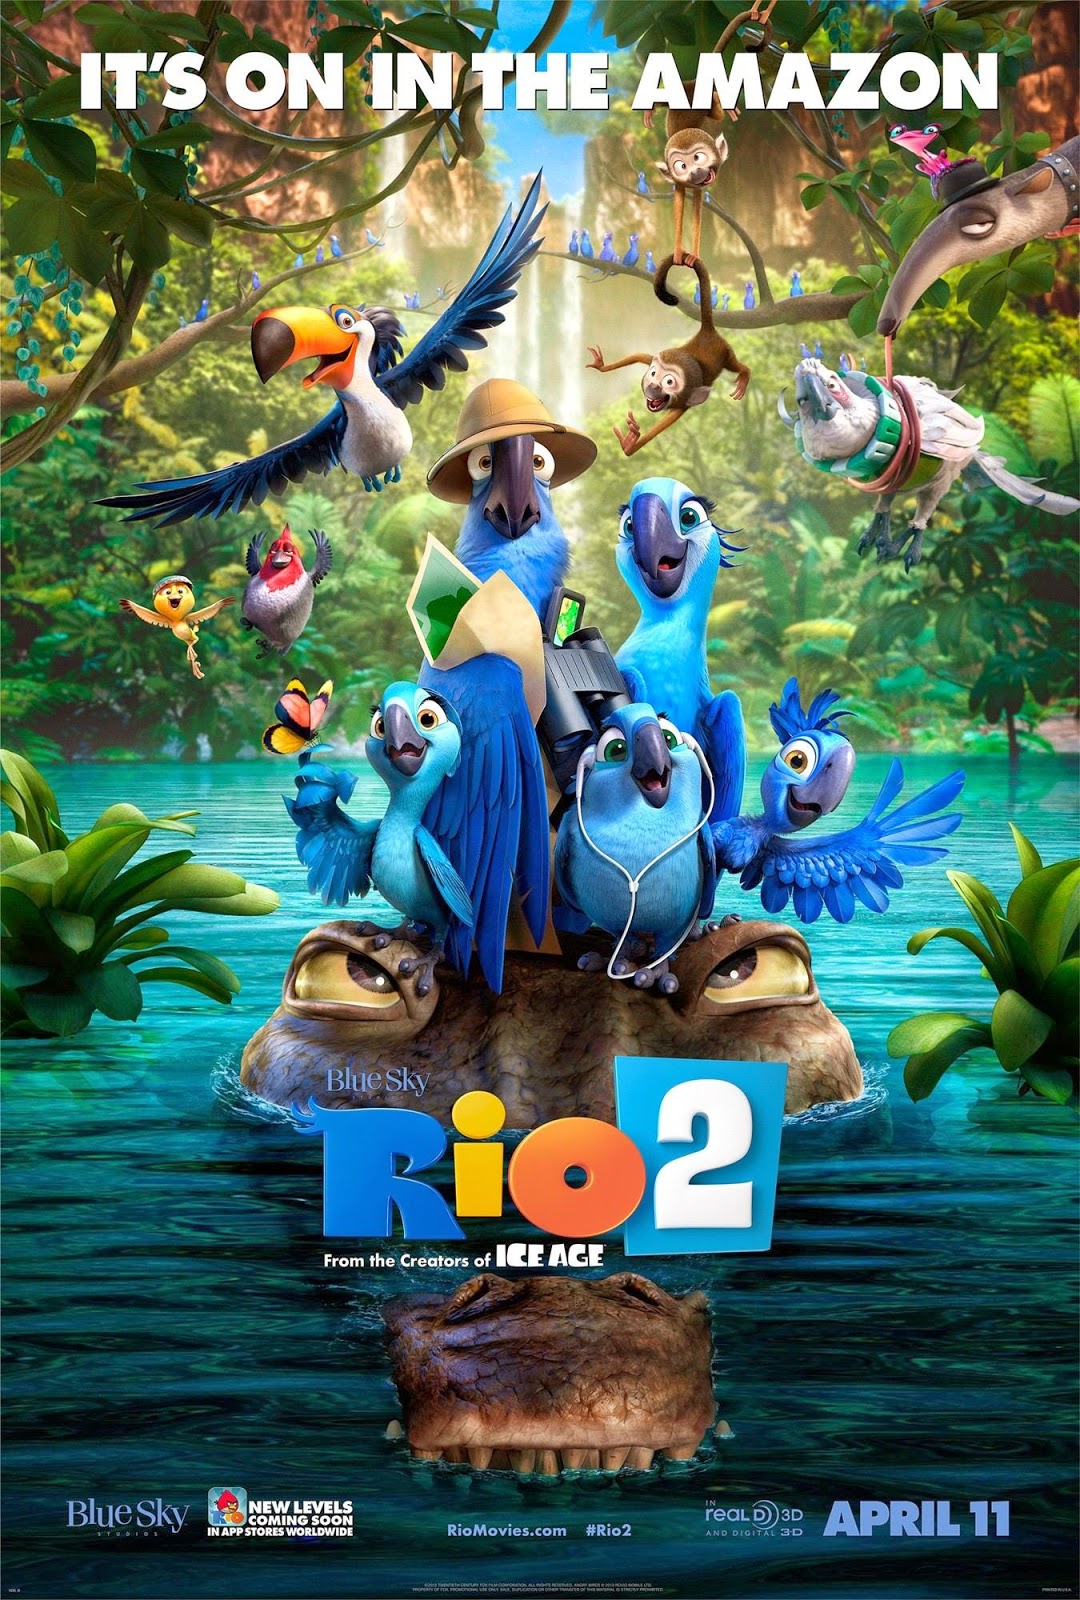 Rio 2 Review: Superficial Animated Entertainment - sandwichjohnfilms